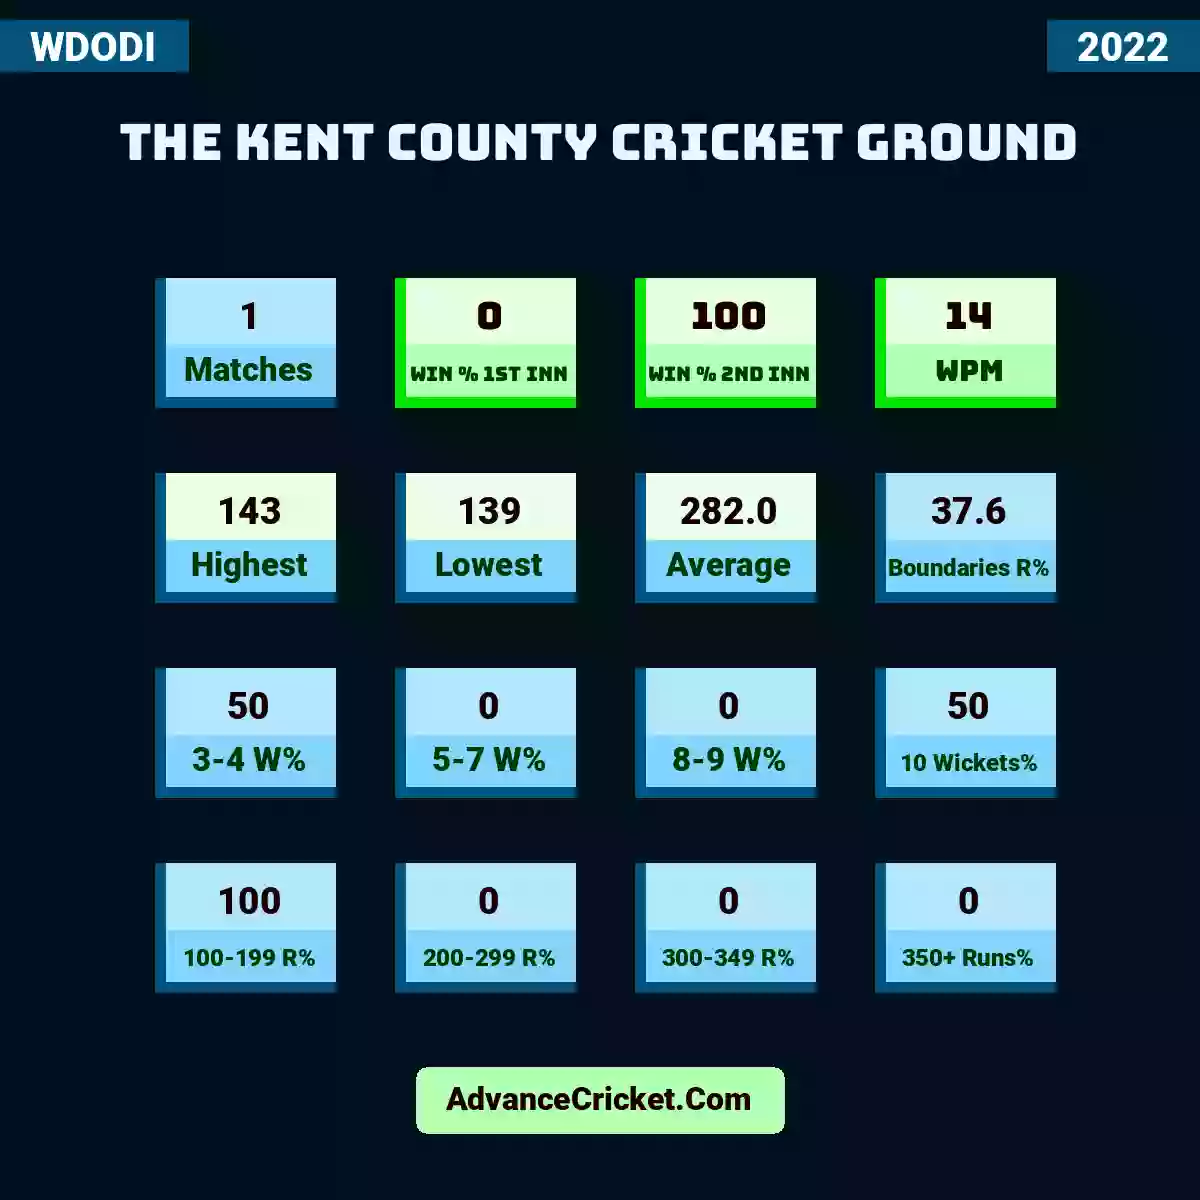 Image showing The Kent County Cricket Ground with Matches: 1, Win % 1st Inn: 0, Win % 2nd Inn: 100, WPM: 14, Highest: 143, Lowest: 139, Average: 282.0, Boundaries R%: 37.6, 3-4 W%: 50, 5-7 W%: 0, 8-9 W%: 0, 10 Wickets%: 50, 100-199 R%: 100, 200-299 R%: 0, 300-349 R%: 0, 350+ Runs%: 0.